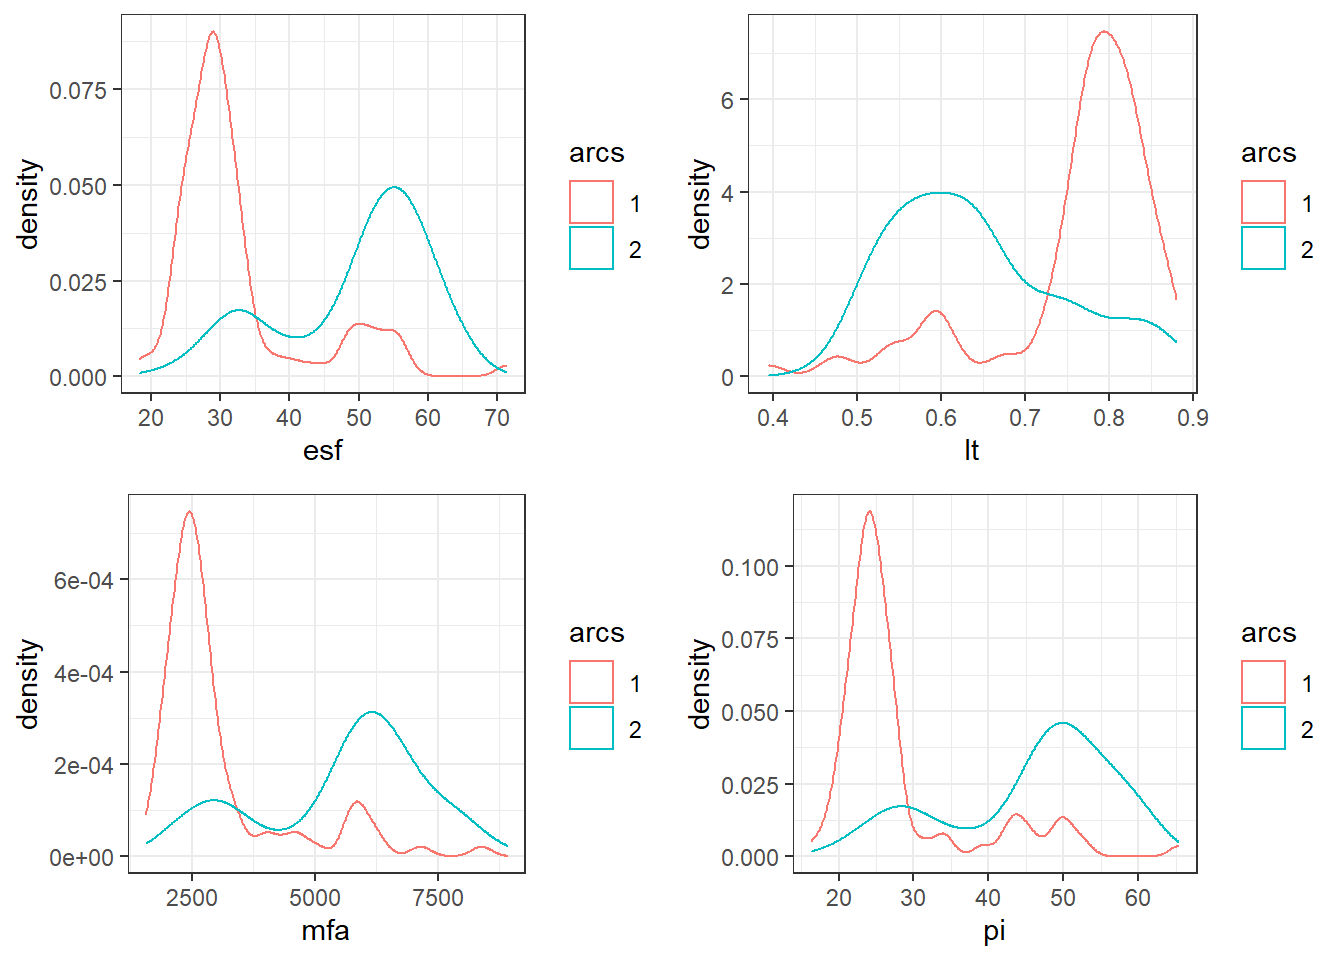 Smooth density histograms for ESF, LT, MFA, and PI. The histograms follow a bimodal distribution driven by the number of arcs.